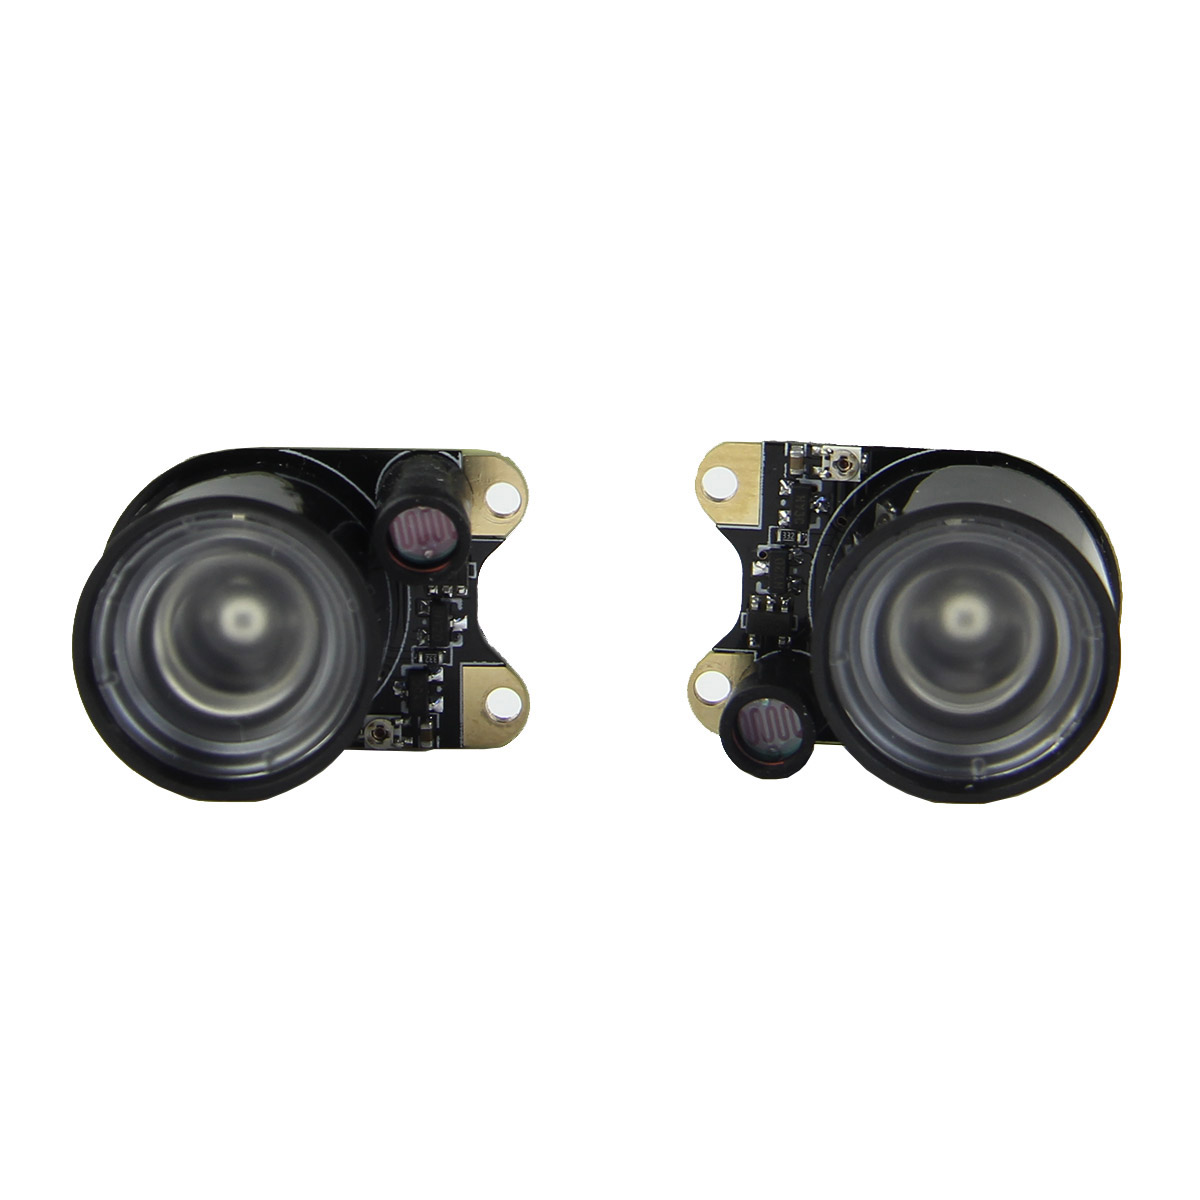 2pcs Infrared IR LED Board Specific For Raspberry Pi Camera 9